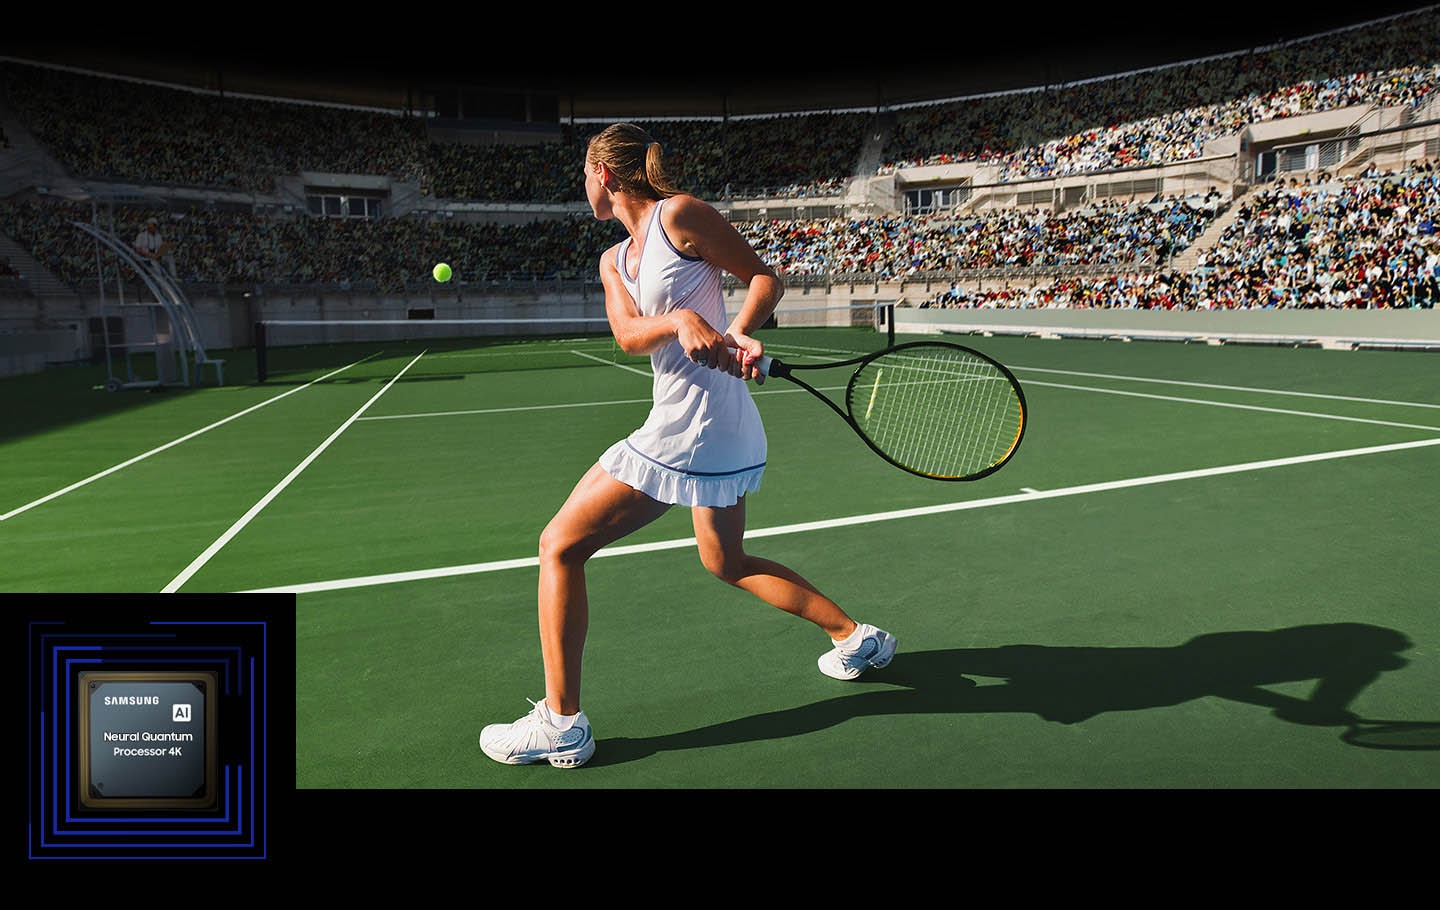 A woman is playing tennis in front of a large crowd.  The Neural Quantum Processor 4K processes the many objects on display and enhances the entire scene.  Neural Quantum Processor 4K is on display in the lower left hand corner.